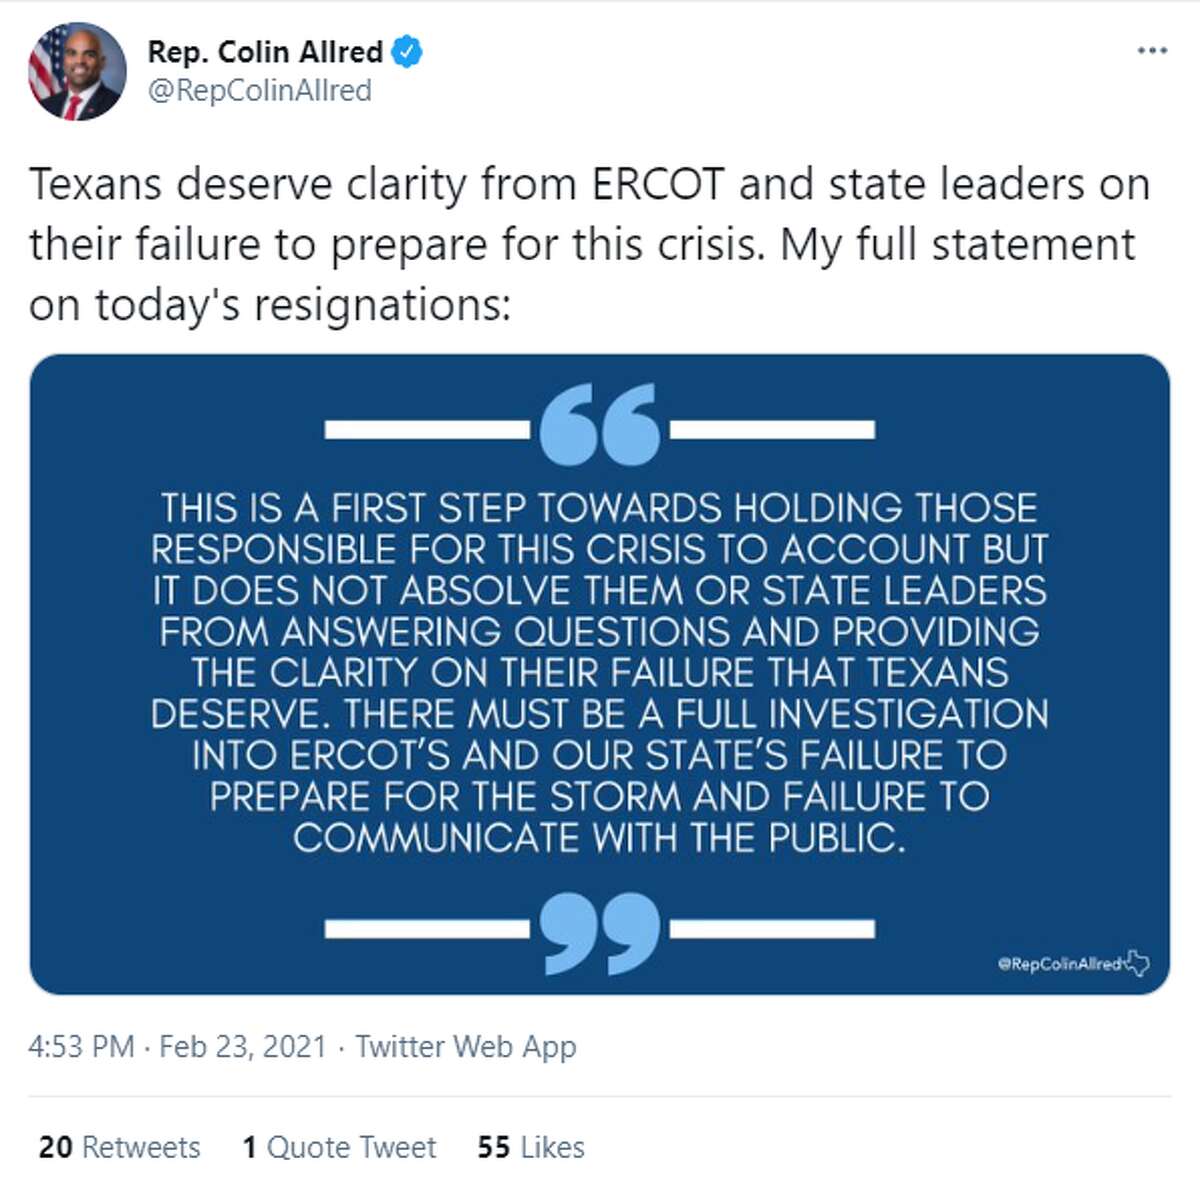 @RepColinAllred: "Texans deserve clarity from ERCOT and state leaders on their failure to prepare for this crisis."